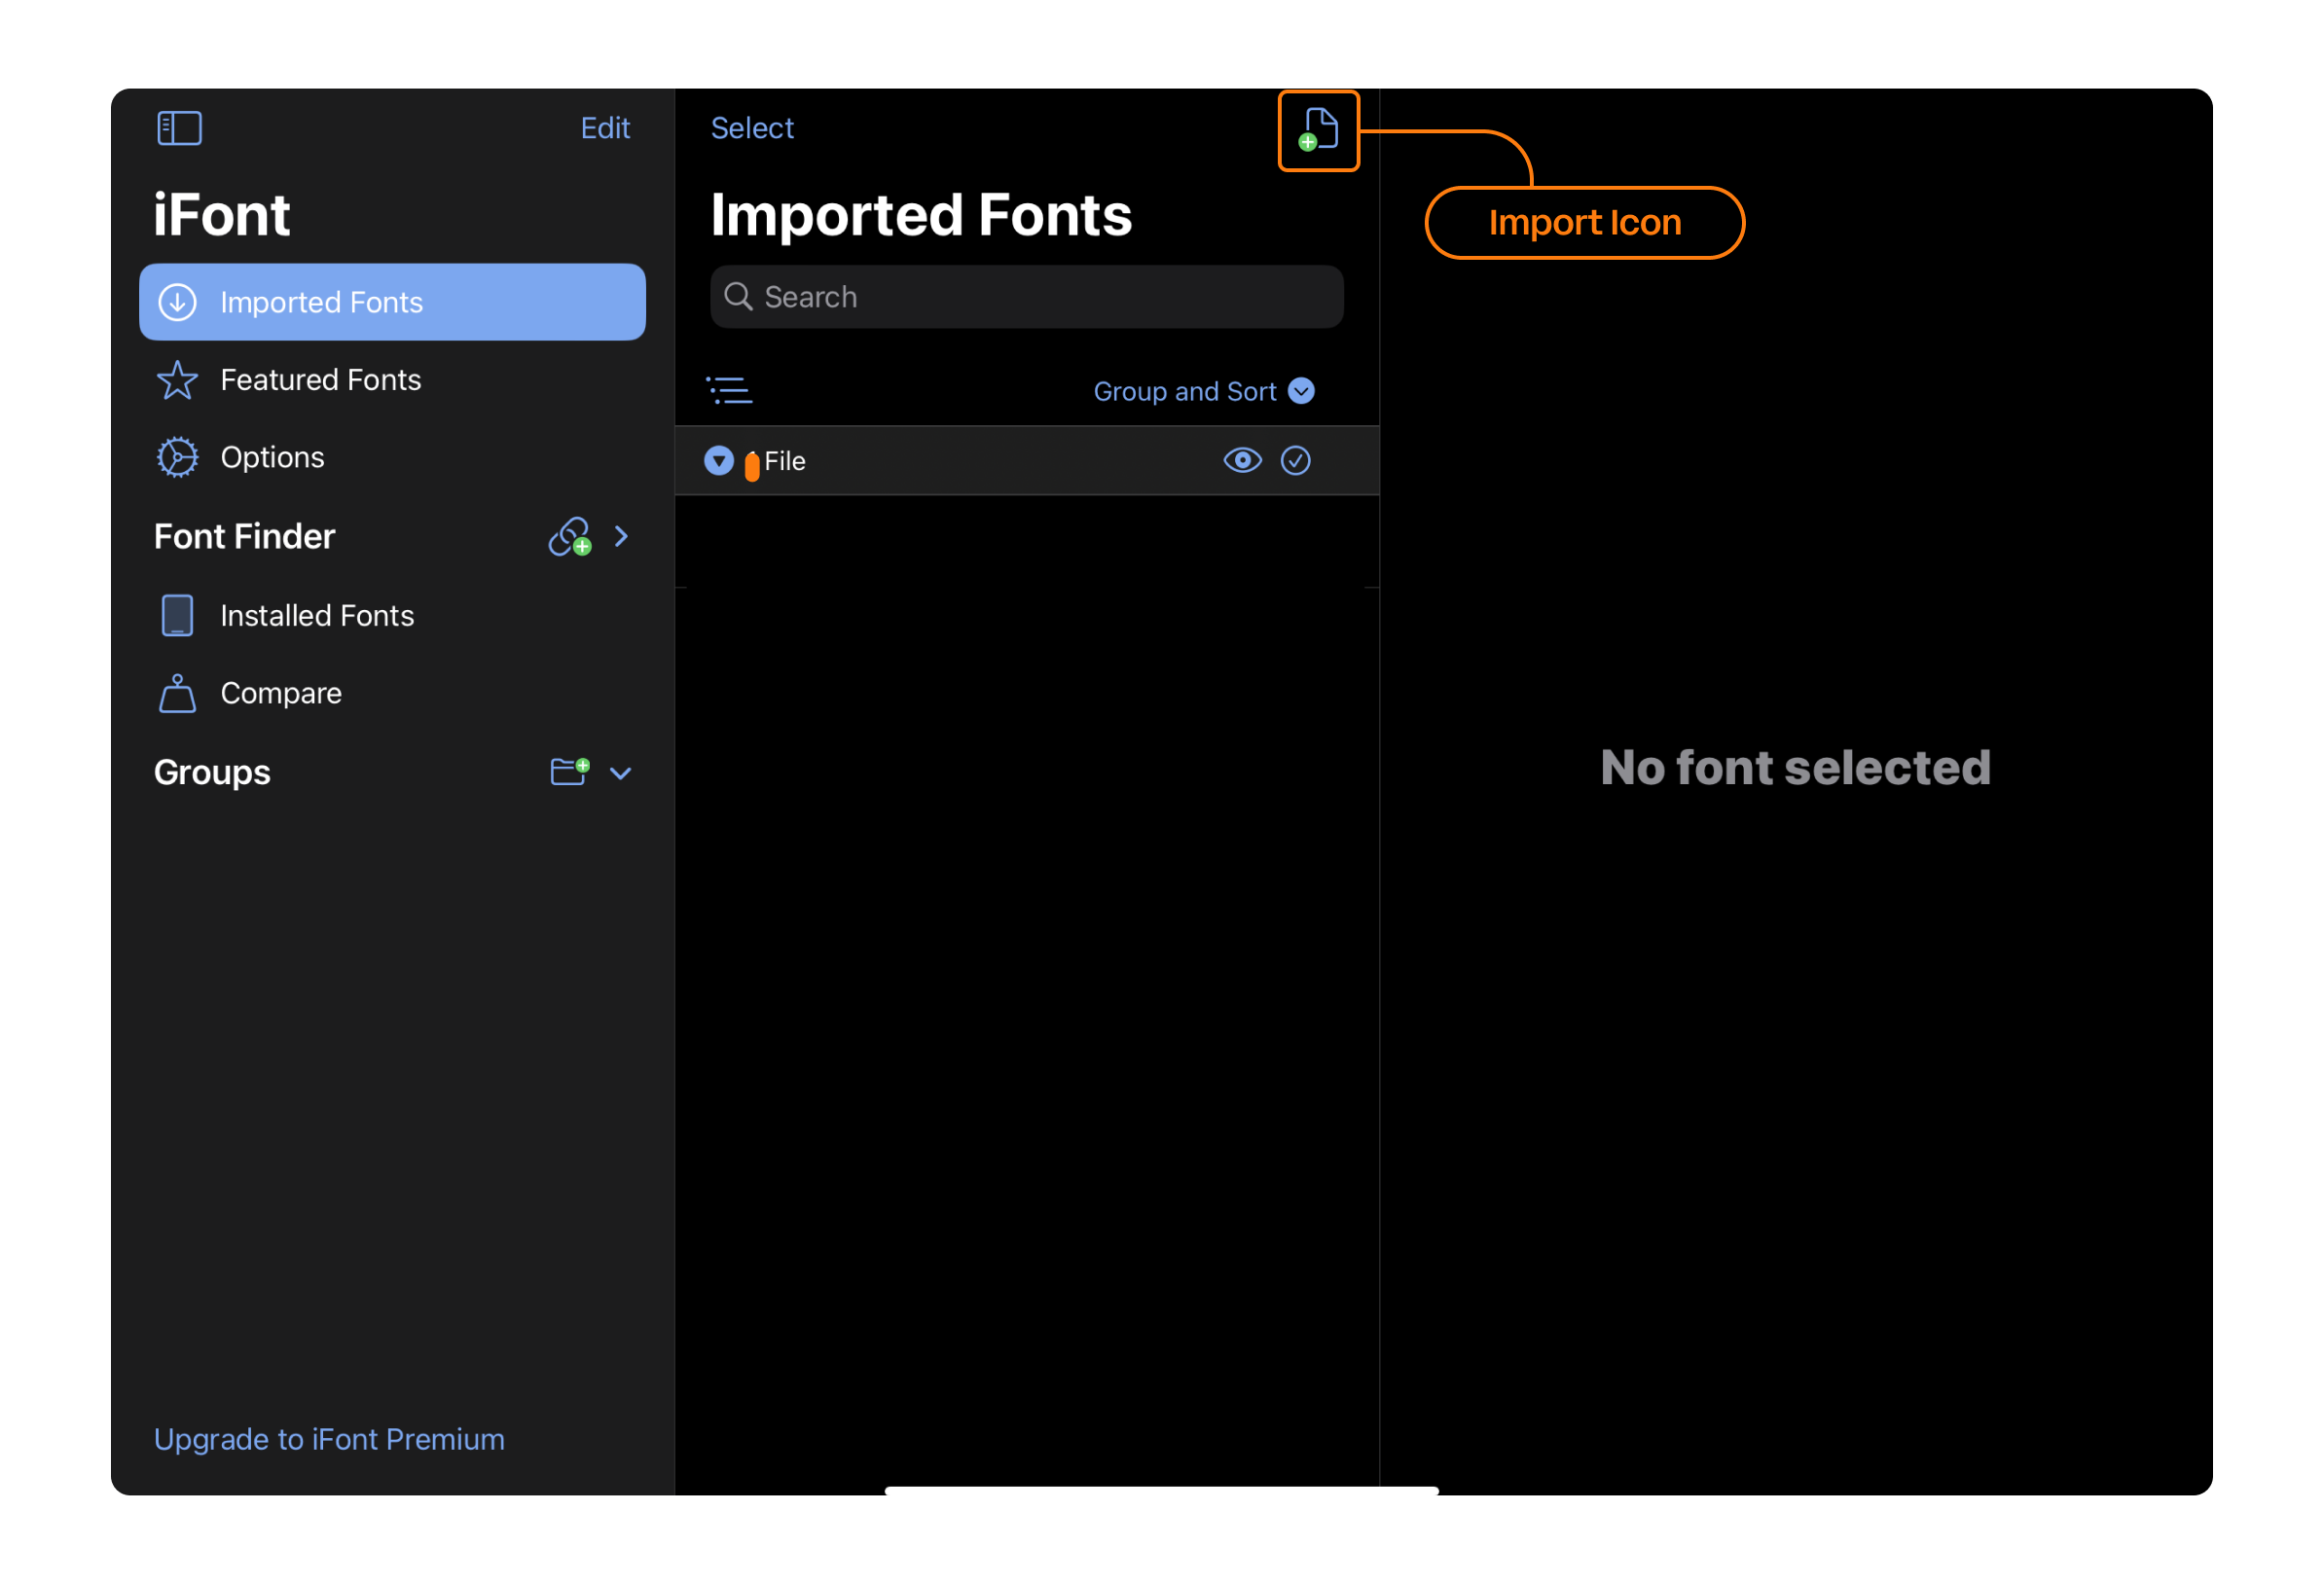 iFont interface highlighting the import icon